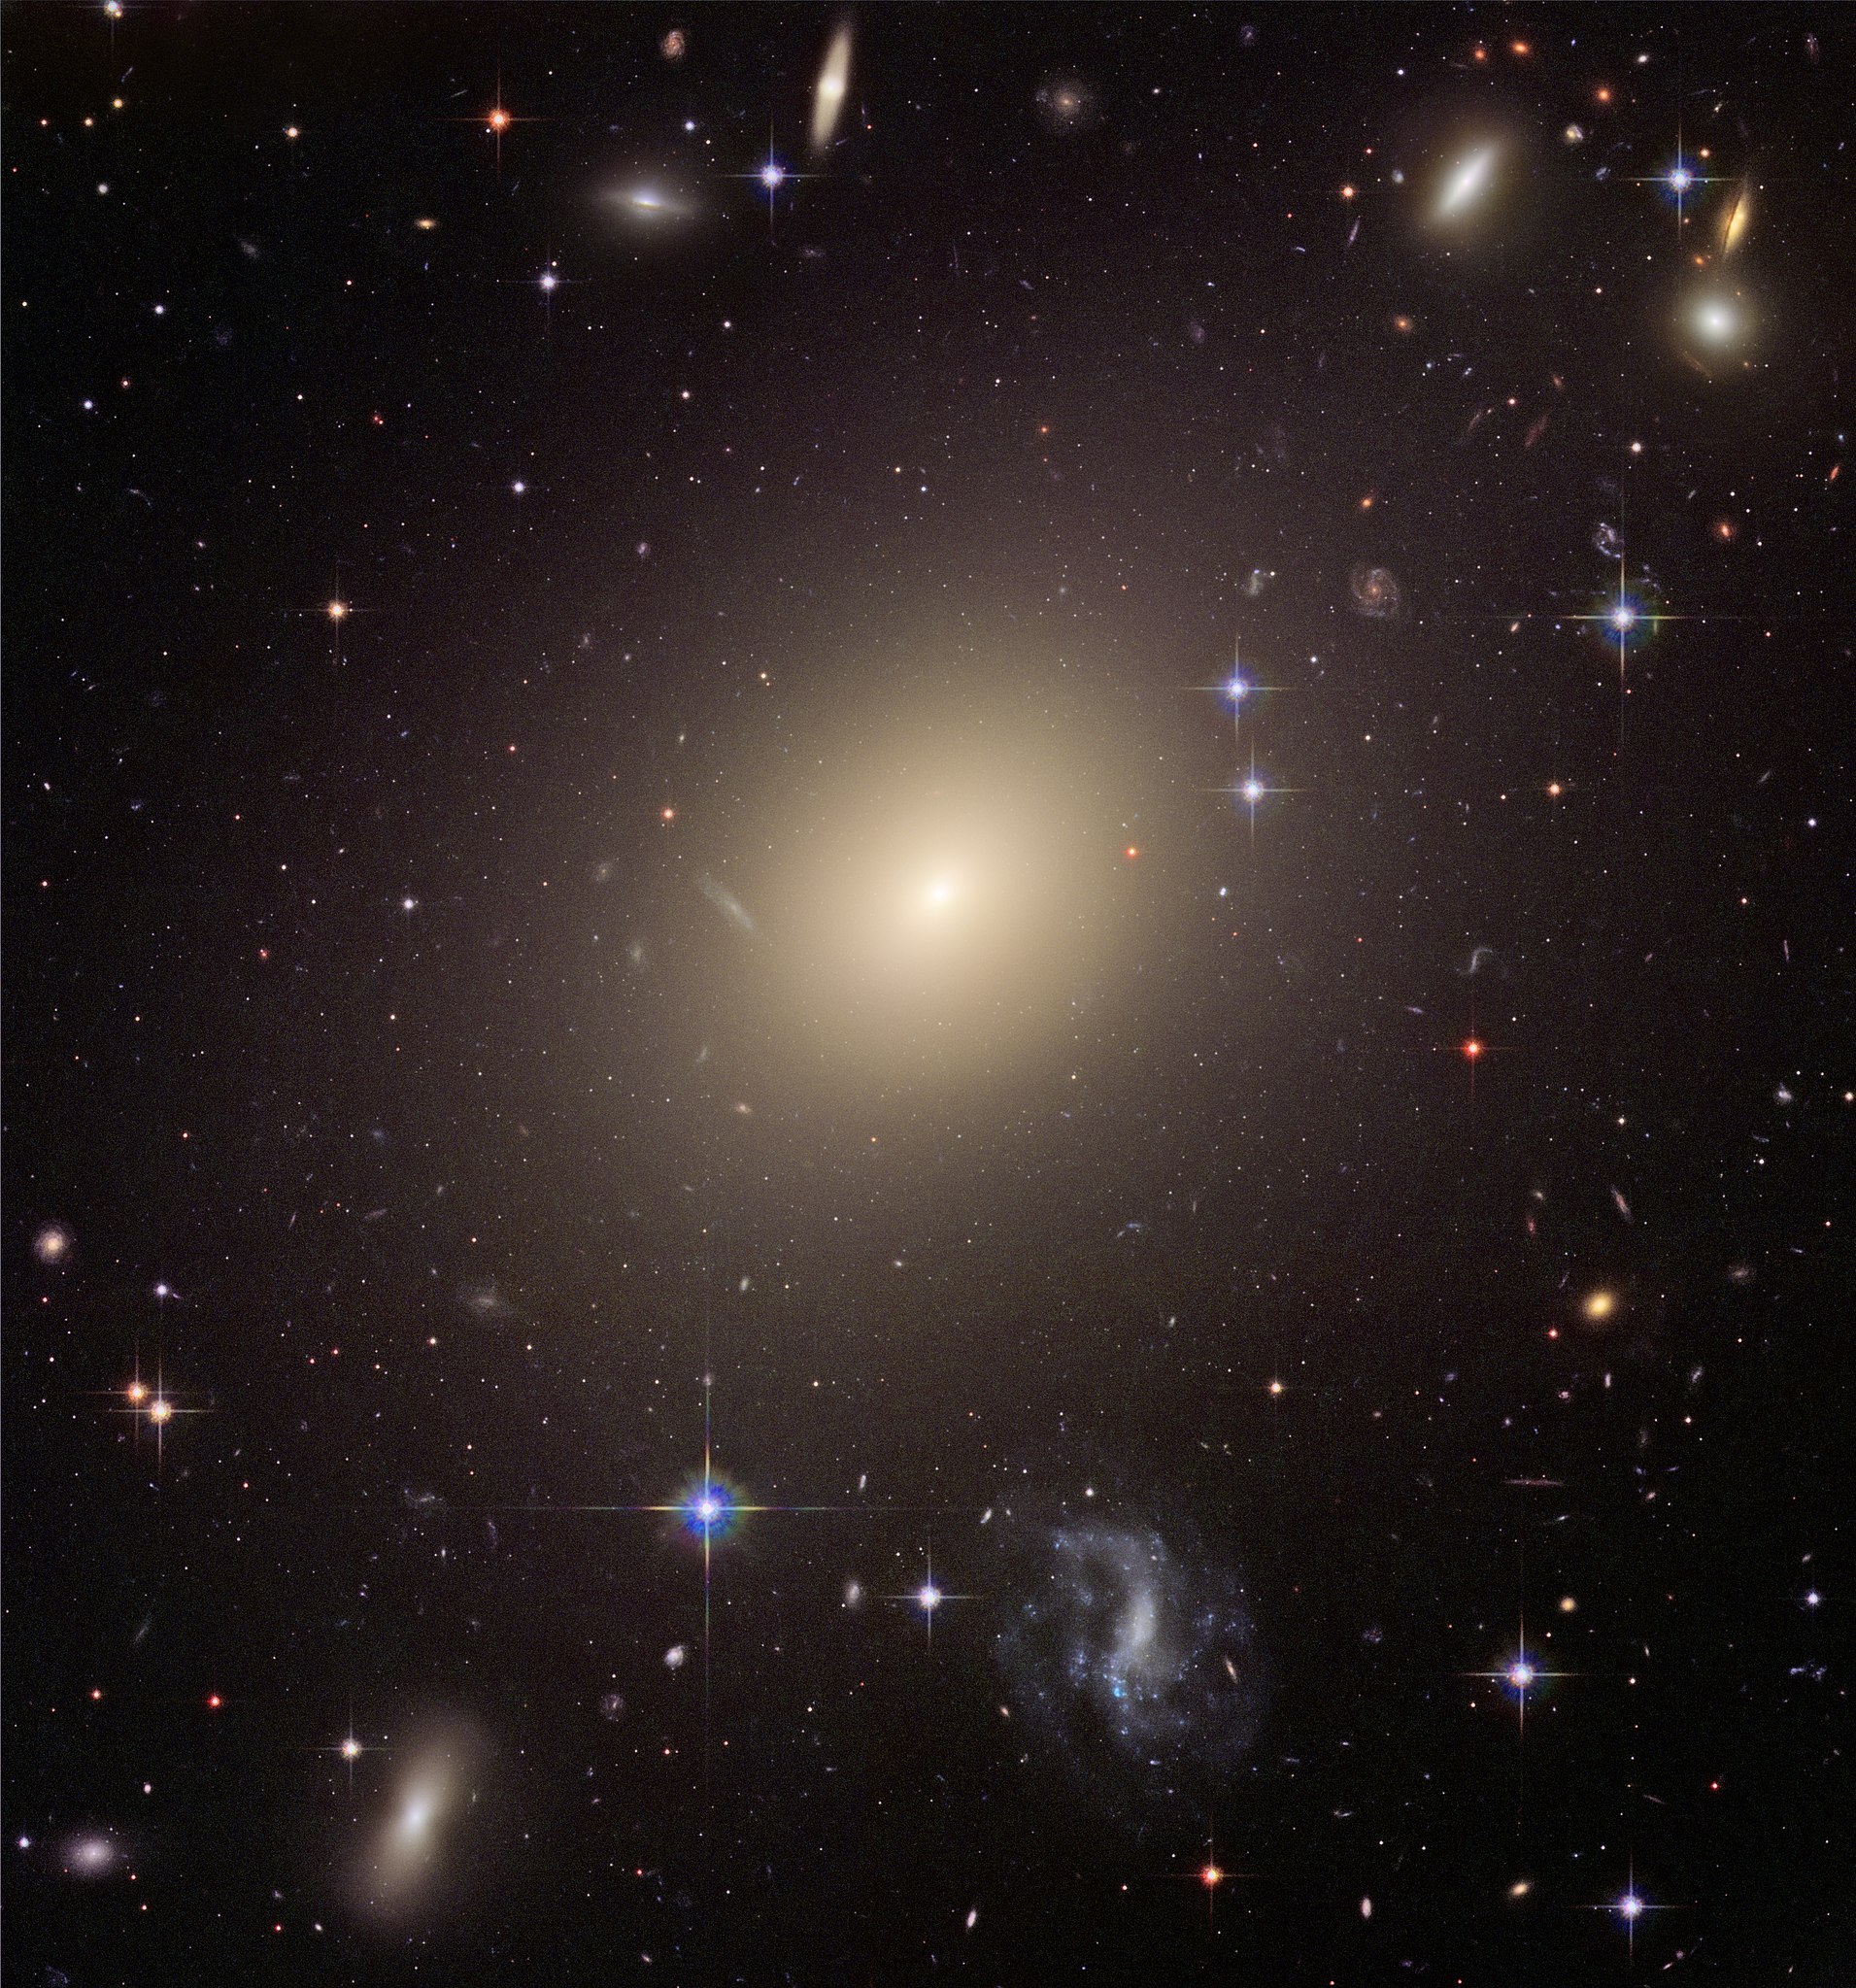 Abell S740 galaxia ESO 325-G004